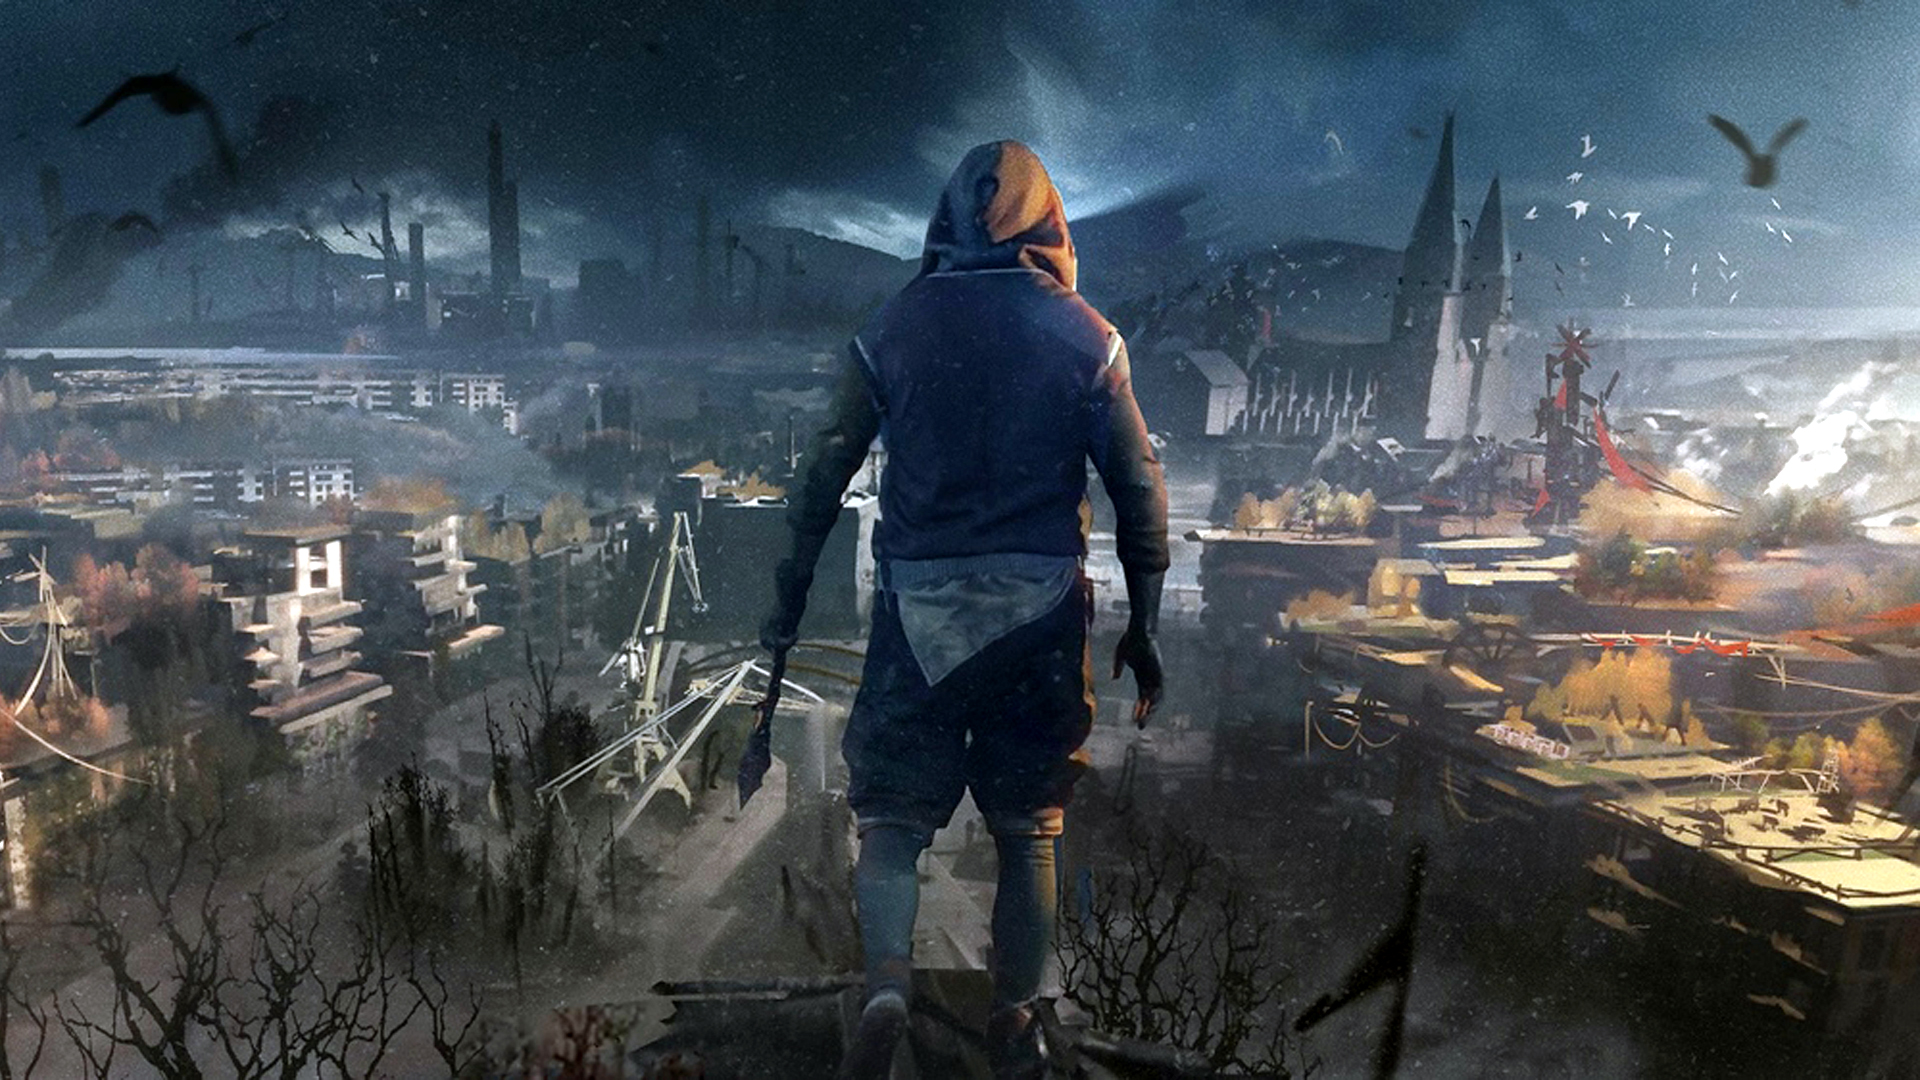 Udsæt fe Elegance Dying Light 2 dev is “seriously thinking about” New Game Plus | PCGamesN